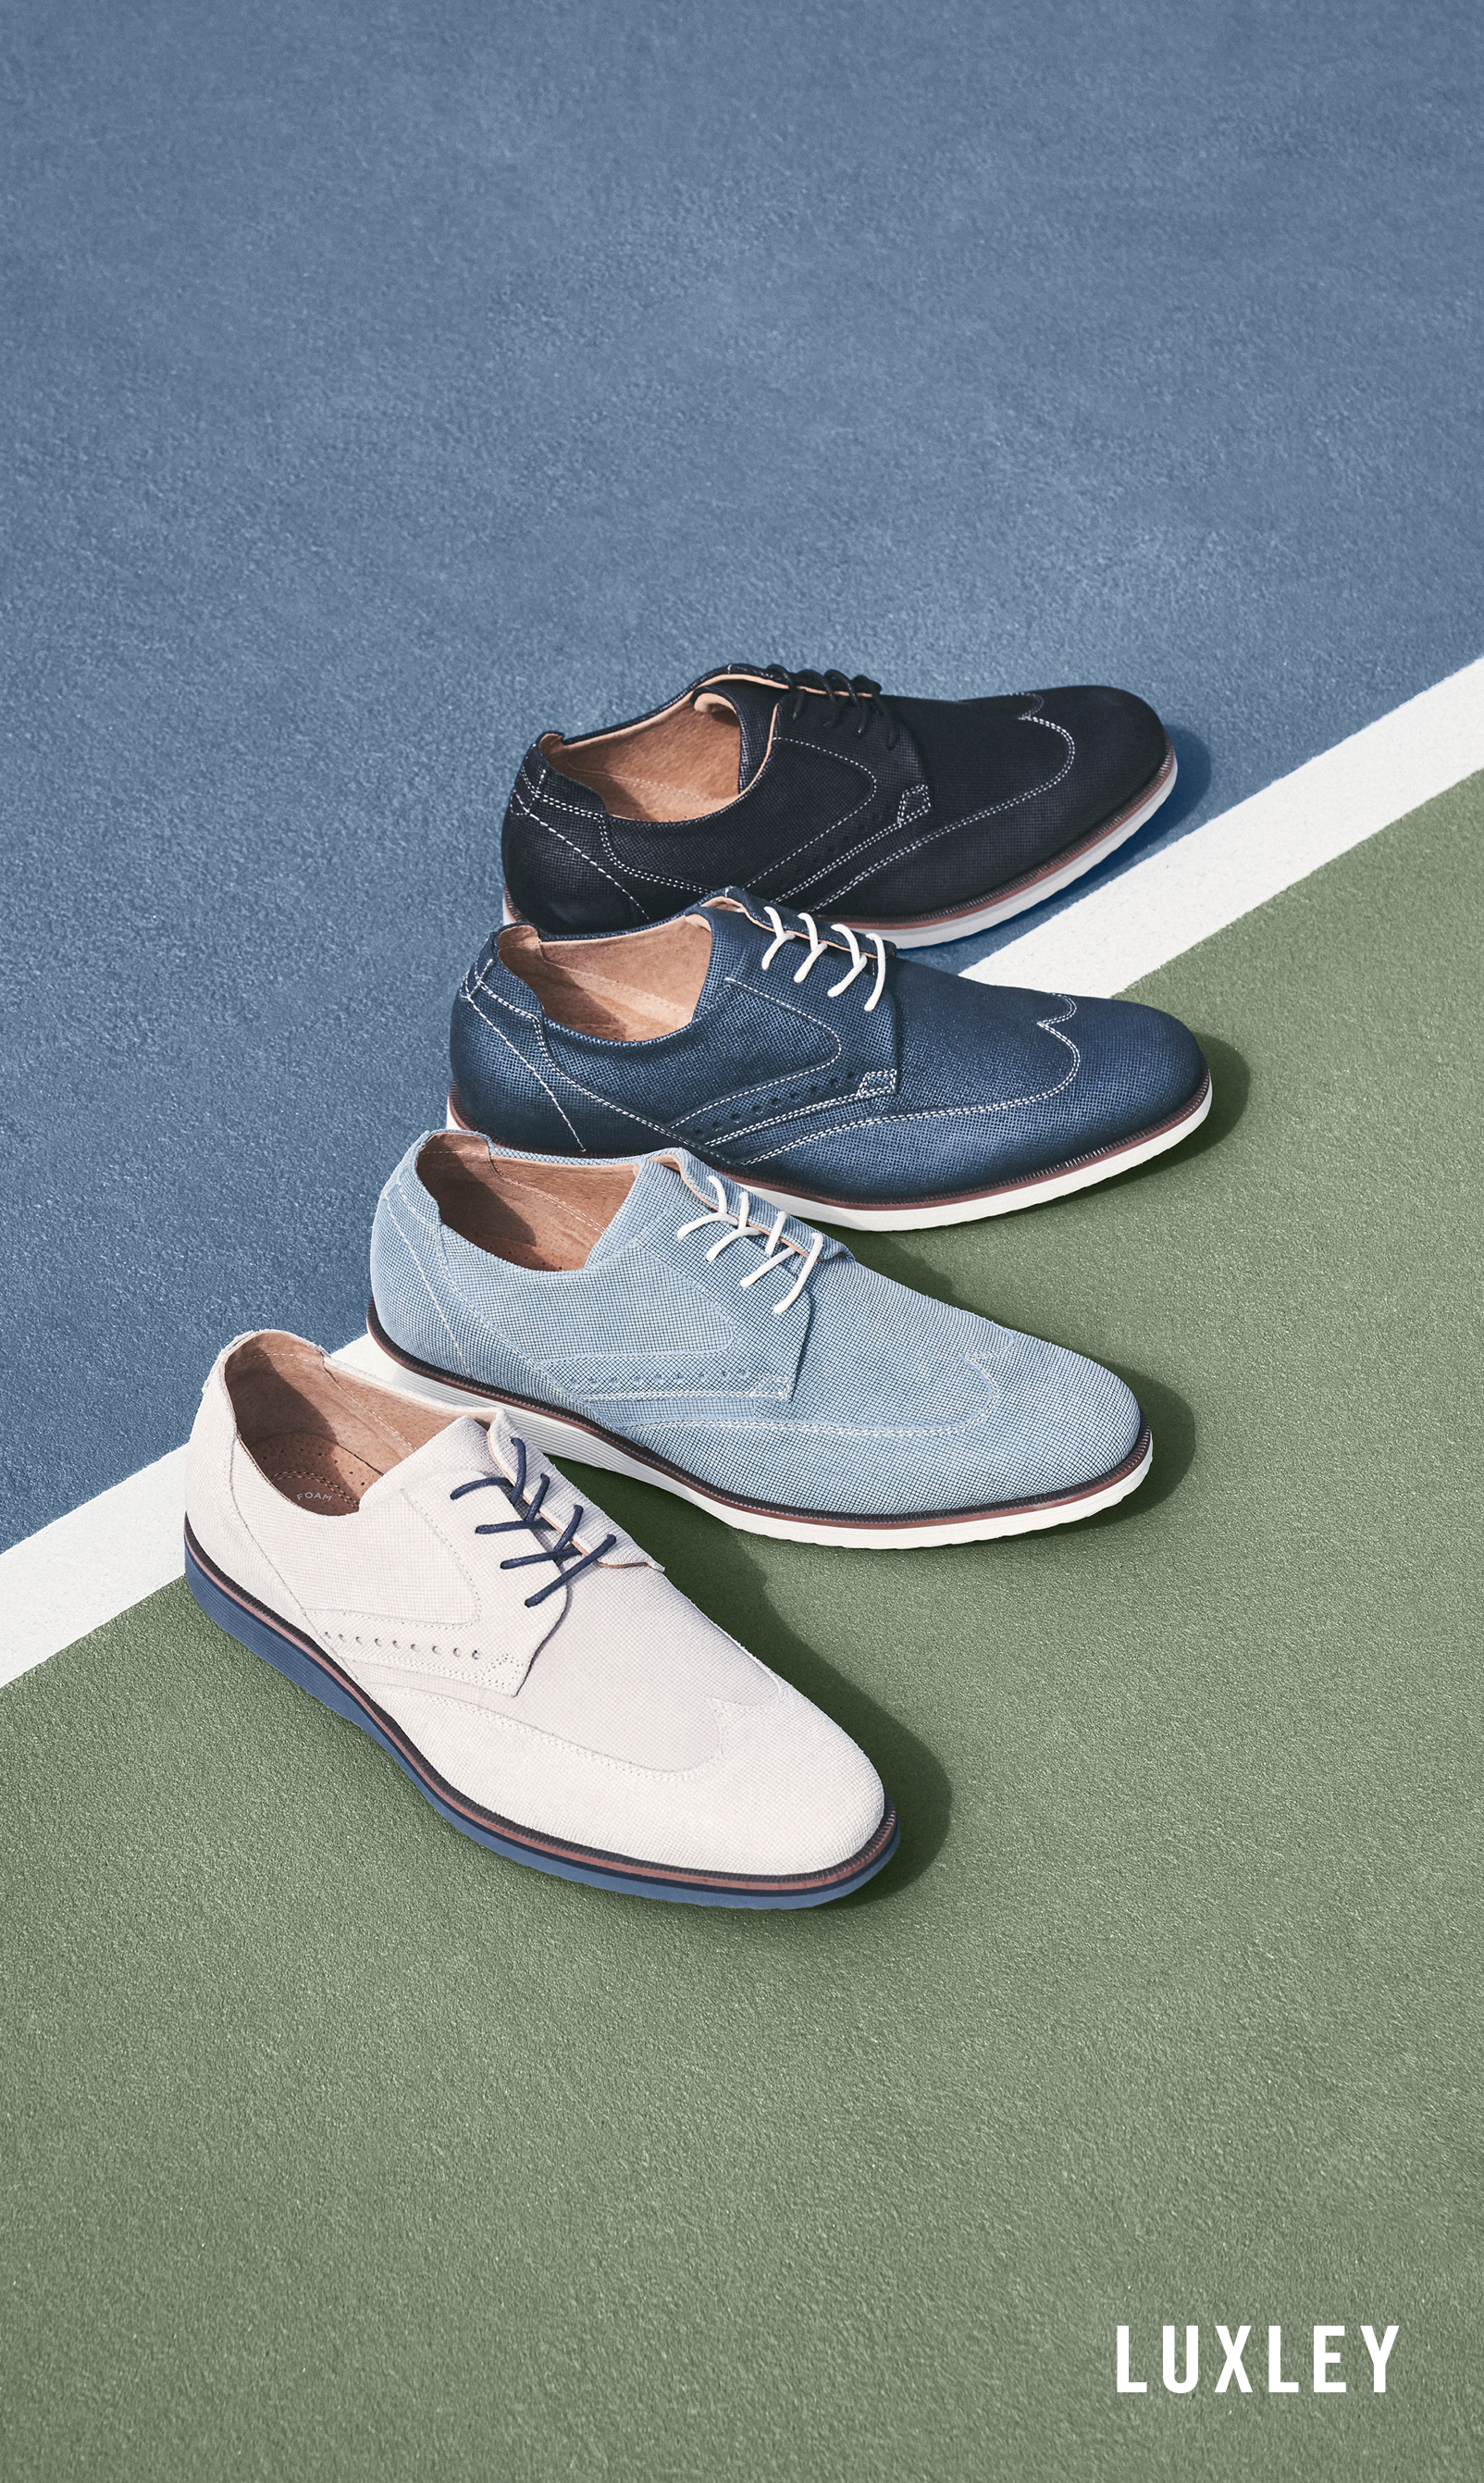 Father's Day Picks The image features the Luxley Wingtip Oxford collection in multiple colors.